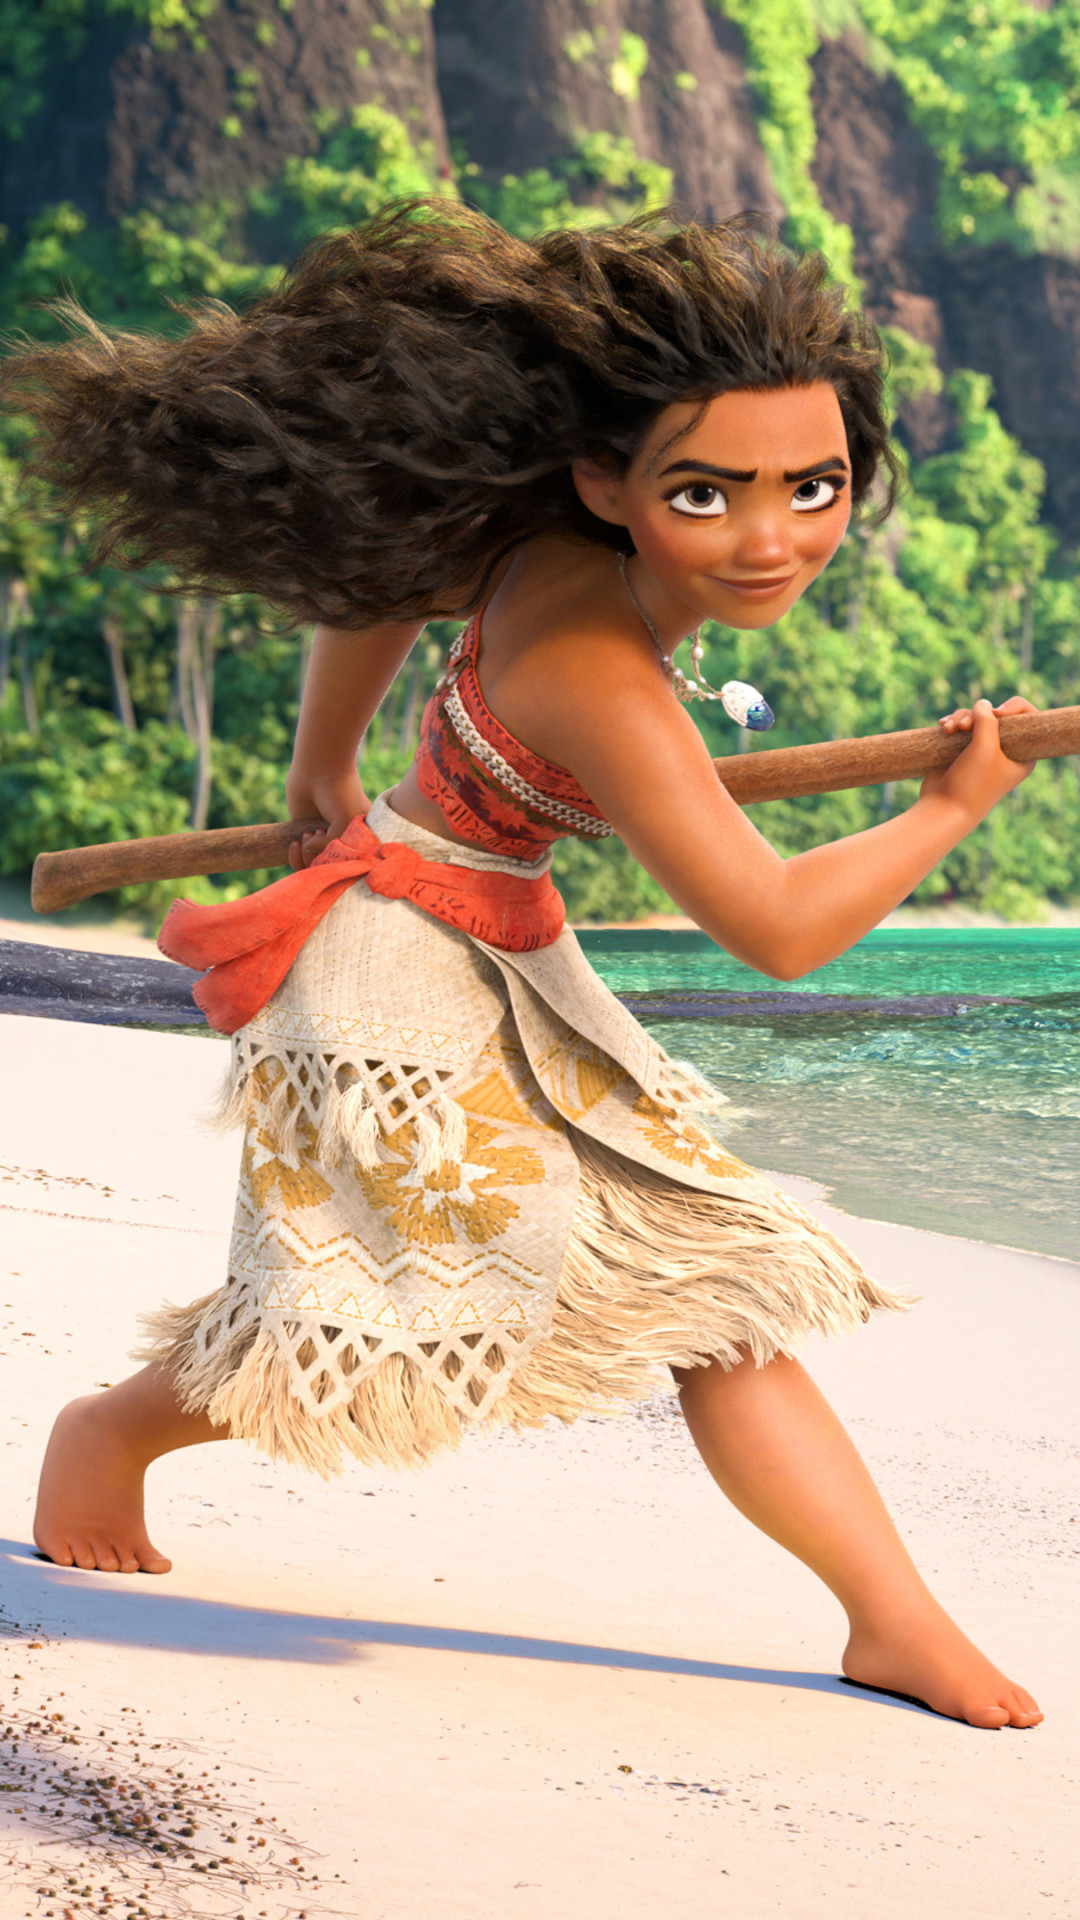 moana movie wallpapers 59 images